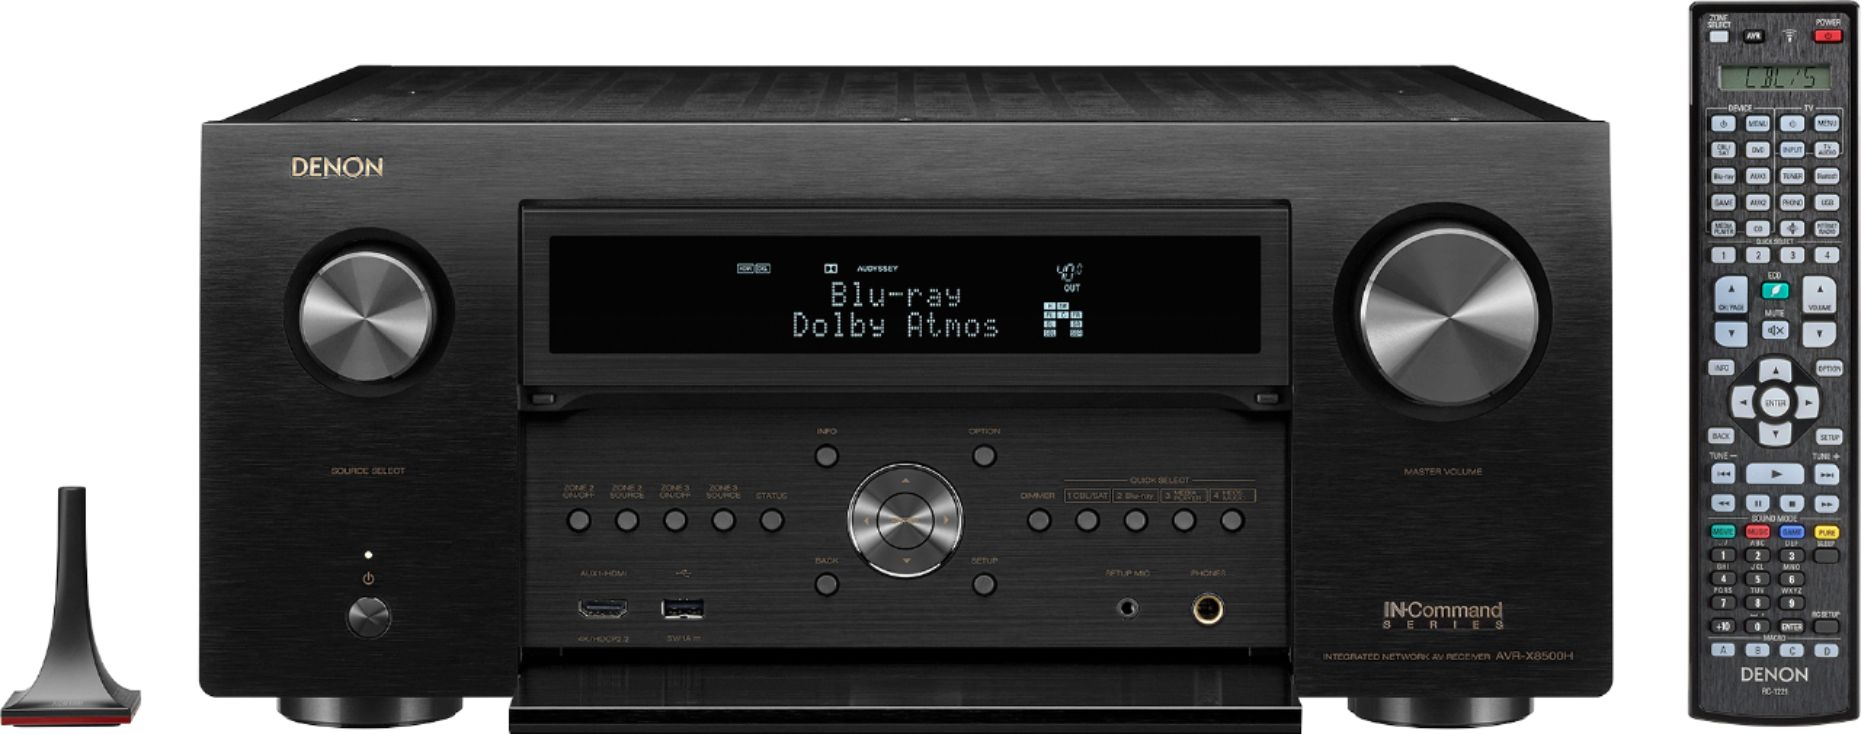 Best Buy: Denon AVR-X8500H Flagship Receiver 8 HDMI In /3 13.2 Channel 150 W/Ch | Dolby Surround Sound | Streaming + HEOS Black AVRX8500H